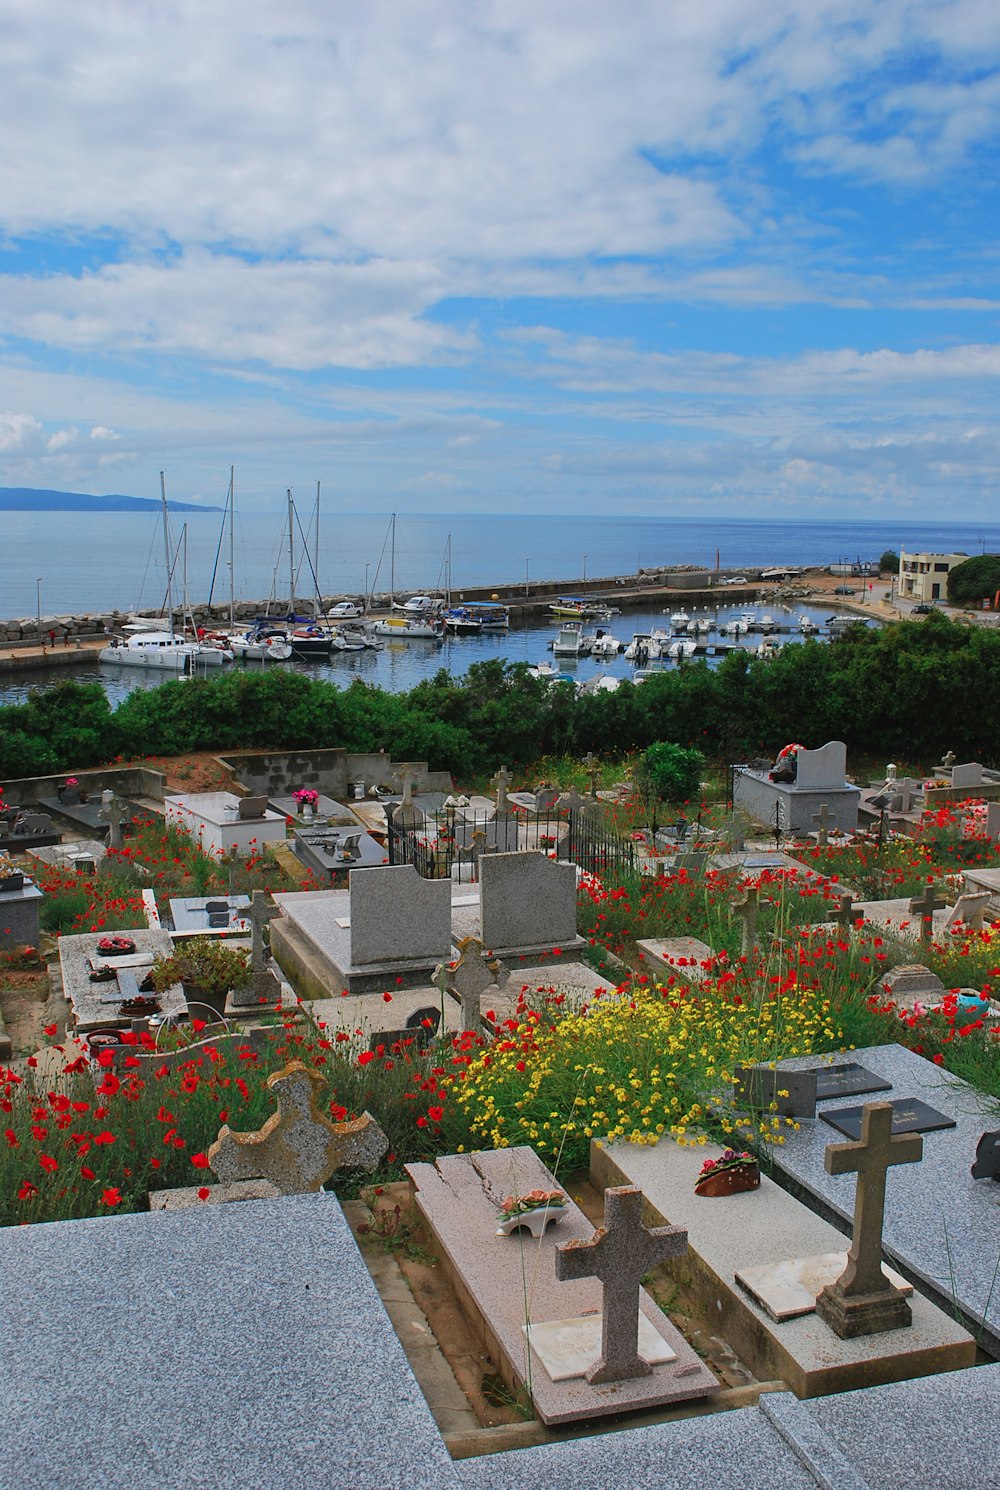 a cemetery with flowers and boats in the water